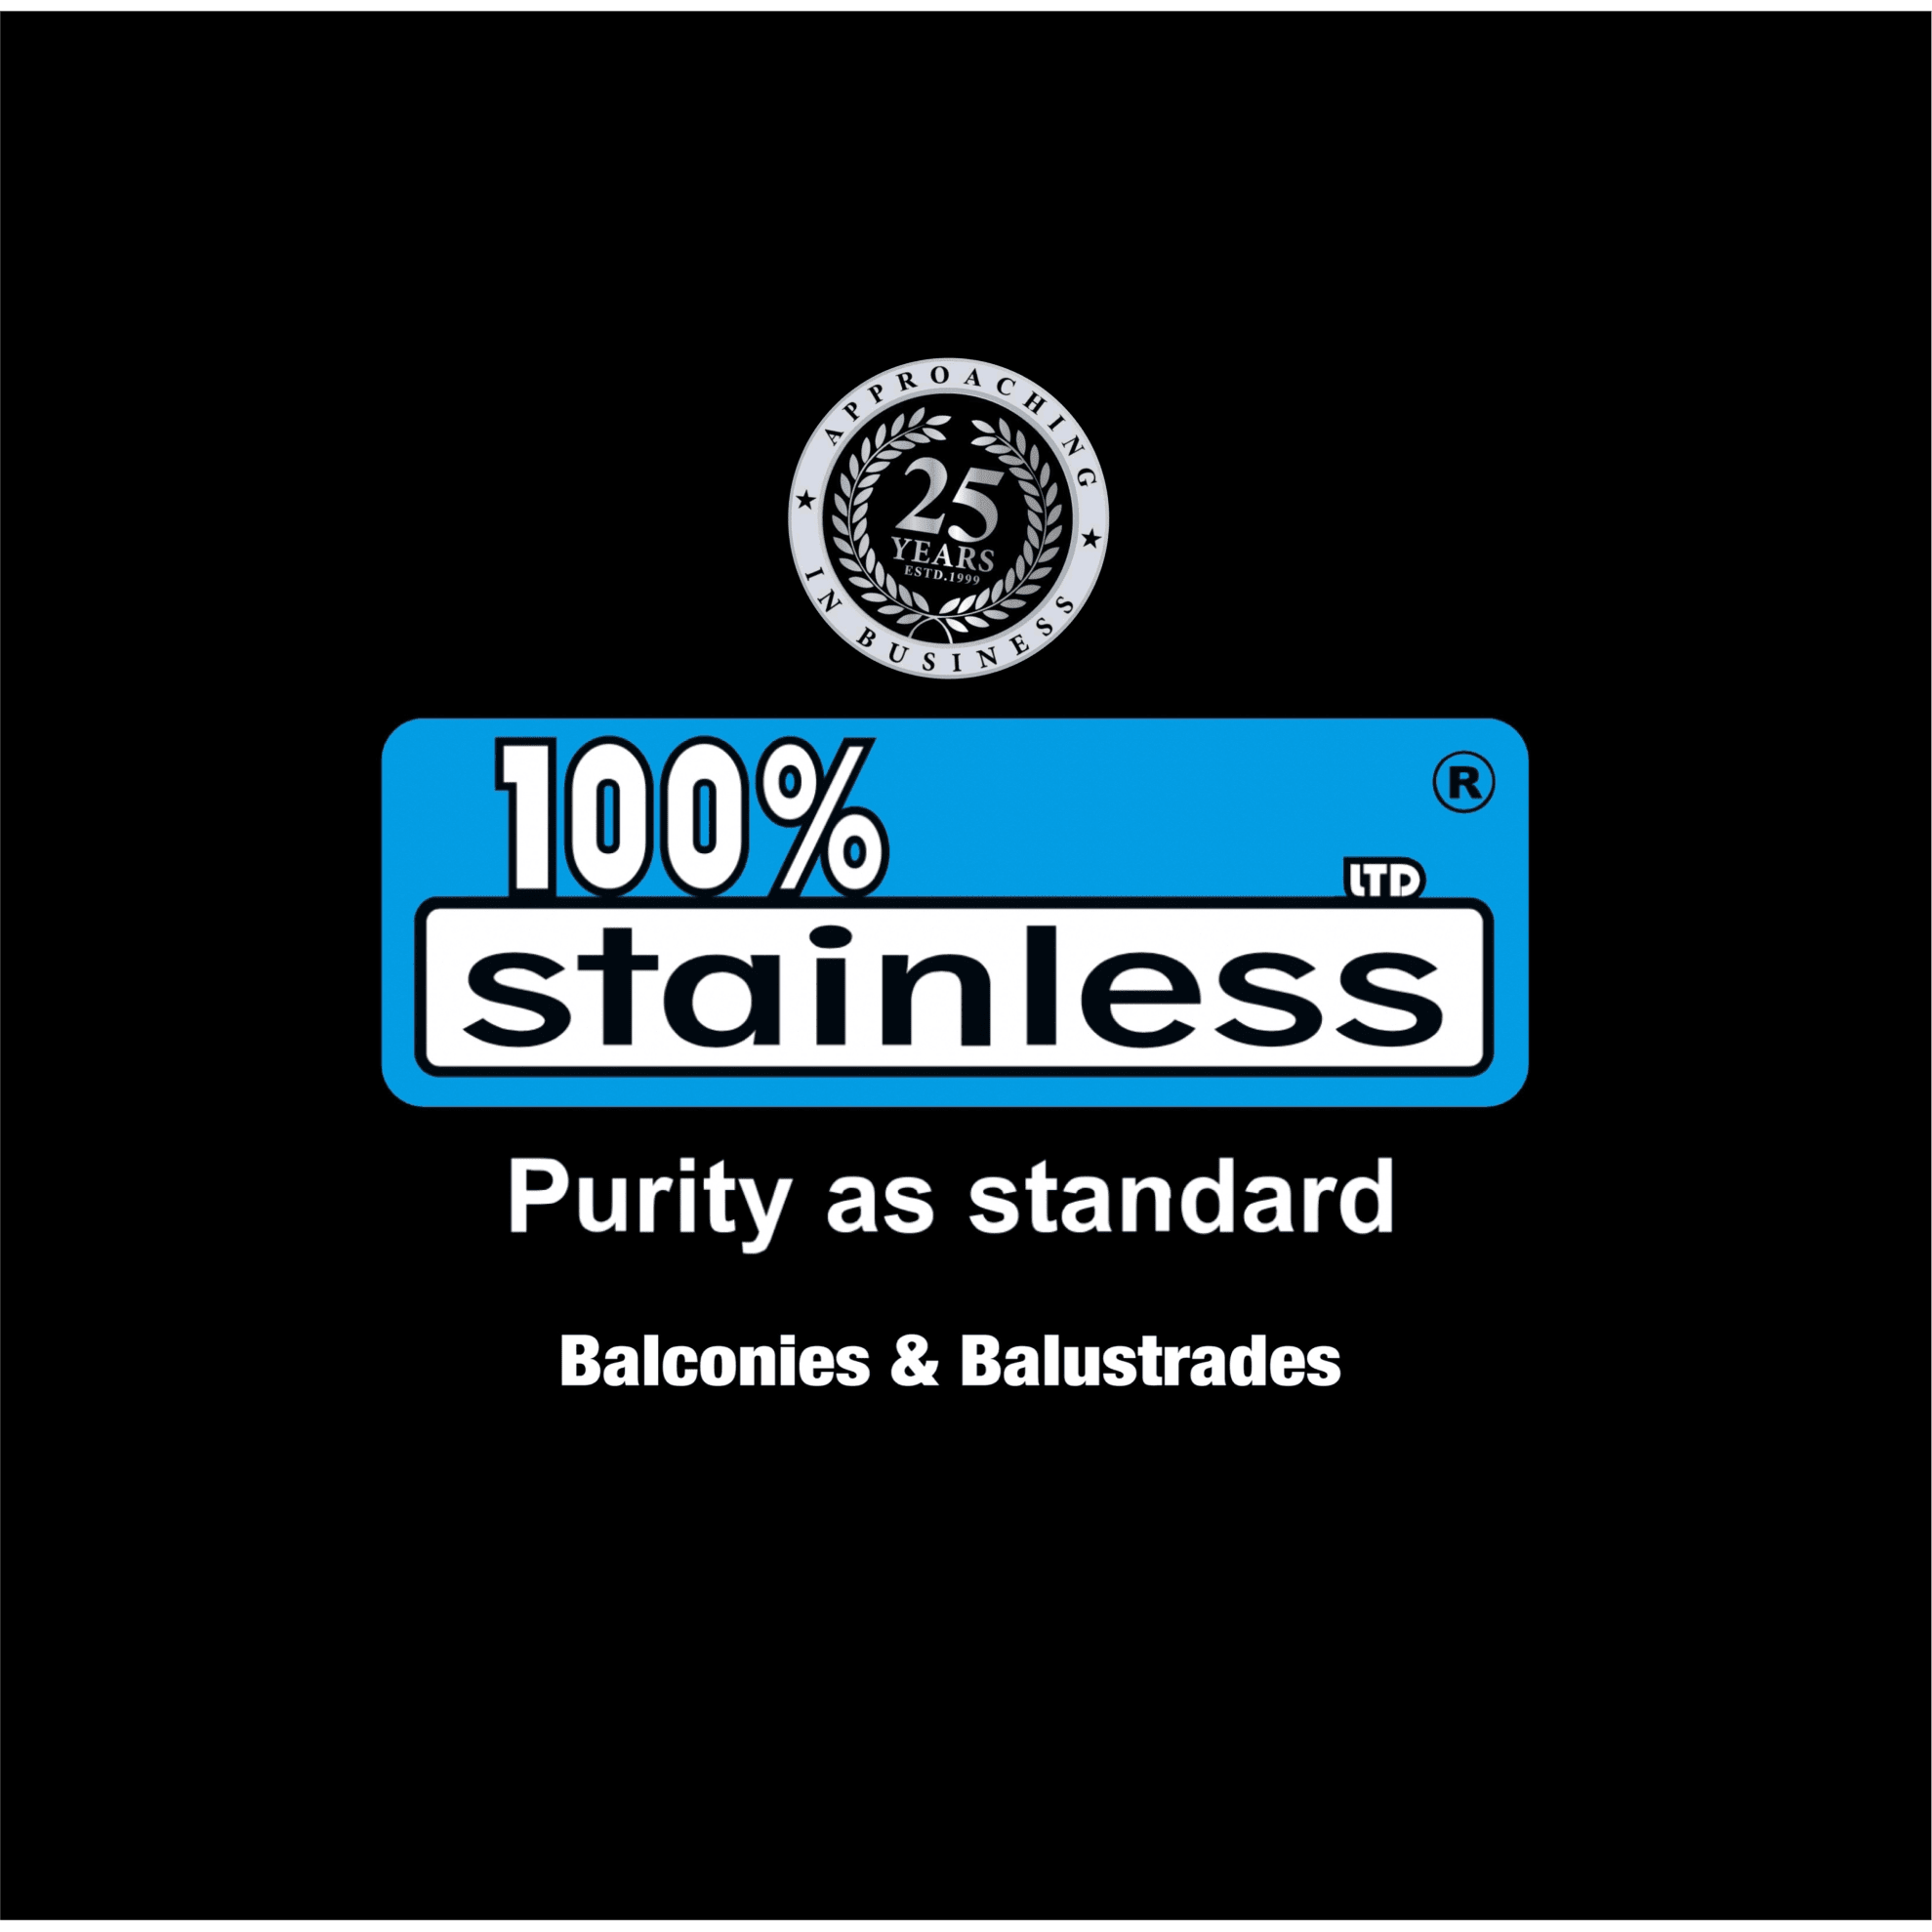 LOGO 100% Stainless Ltd Plymouth 01752 401213